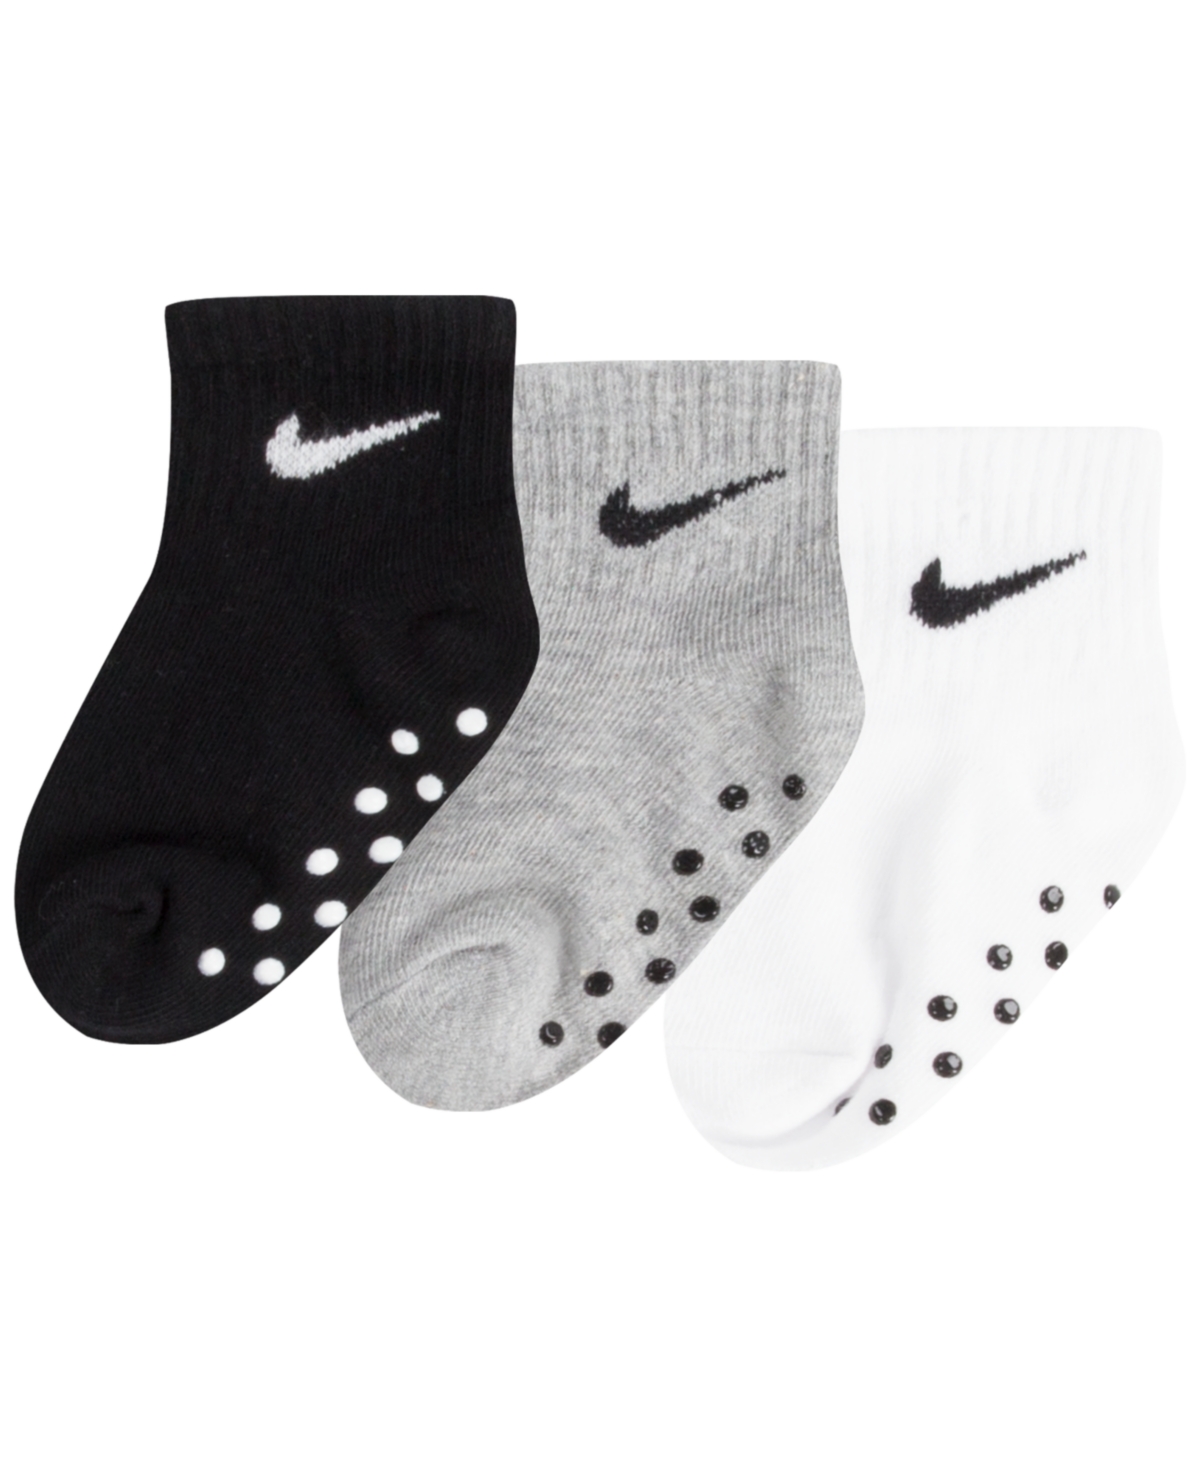 NIKE BABY BOYS OR BABY GIRLS CORE ANKLE GRIPPER SOCKS, PACK OF 3